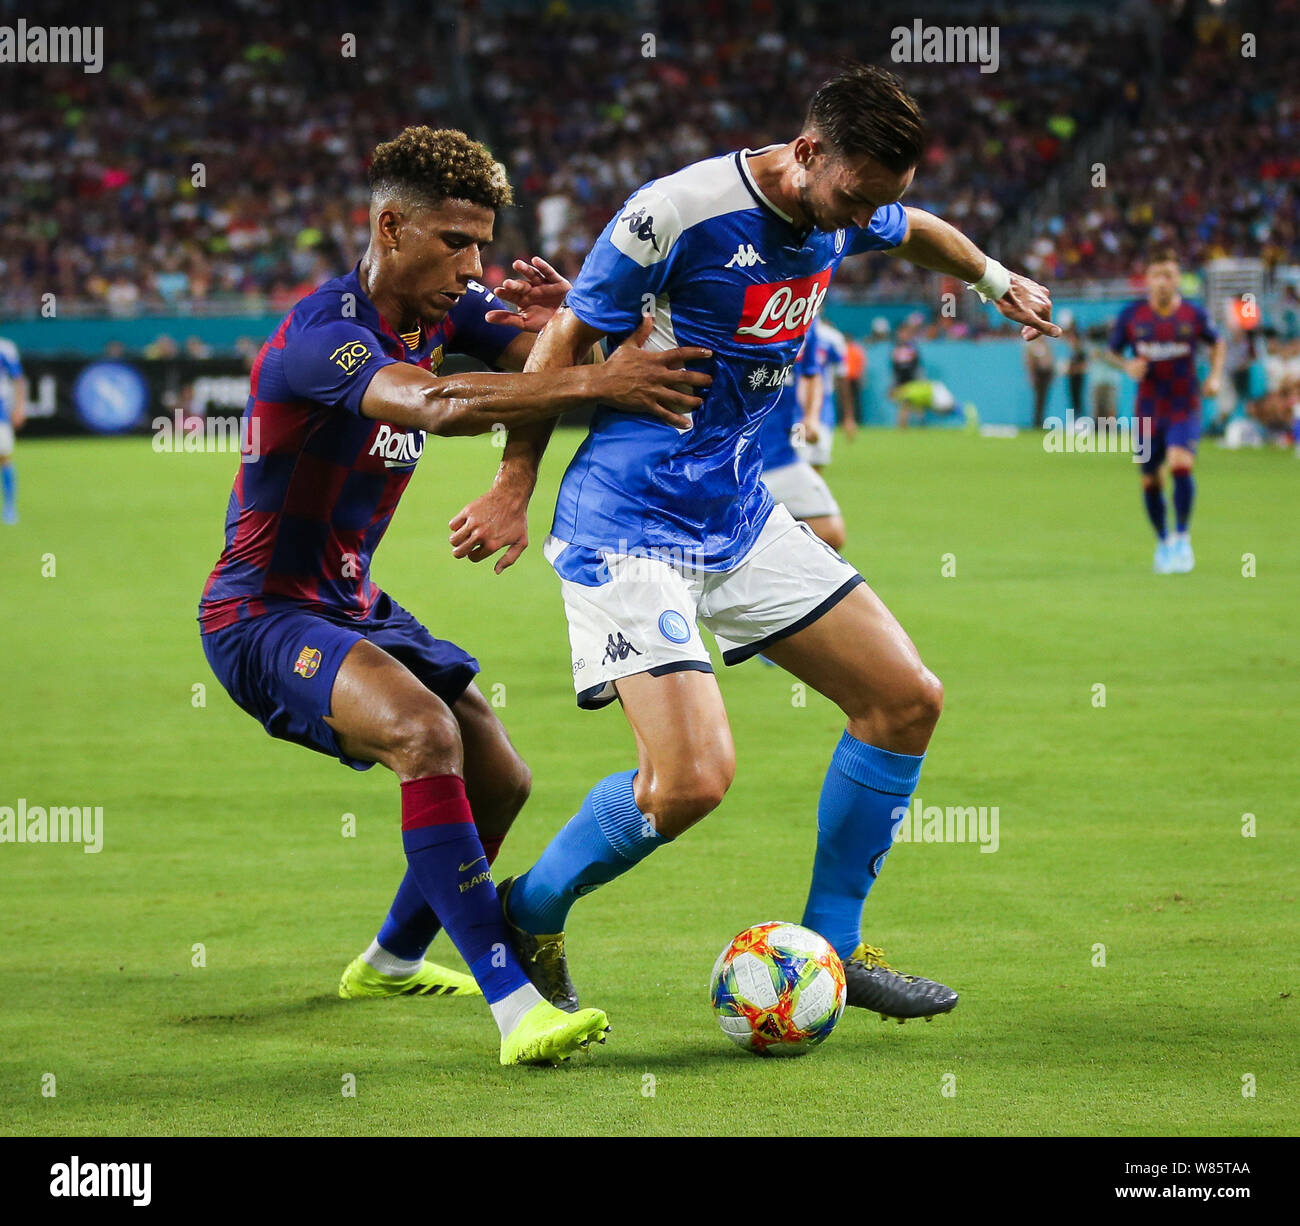 Miami Gardens, Florida, USA. 7th Aug, 2019. SSC Napoli midfielder Fabian Ruiz Pena (8) battles for the ball with FC Barcelona defender Jean-Clair Todibo (6) during a friendly match between FC Barcelona and SSC Napoli at the Hard Rock Stadium in Miami Gardens, Florida. Credit: Mario Houben/ZUMA Wire/Alamy Live News Stock Photo